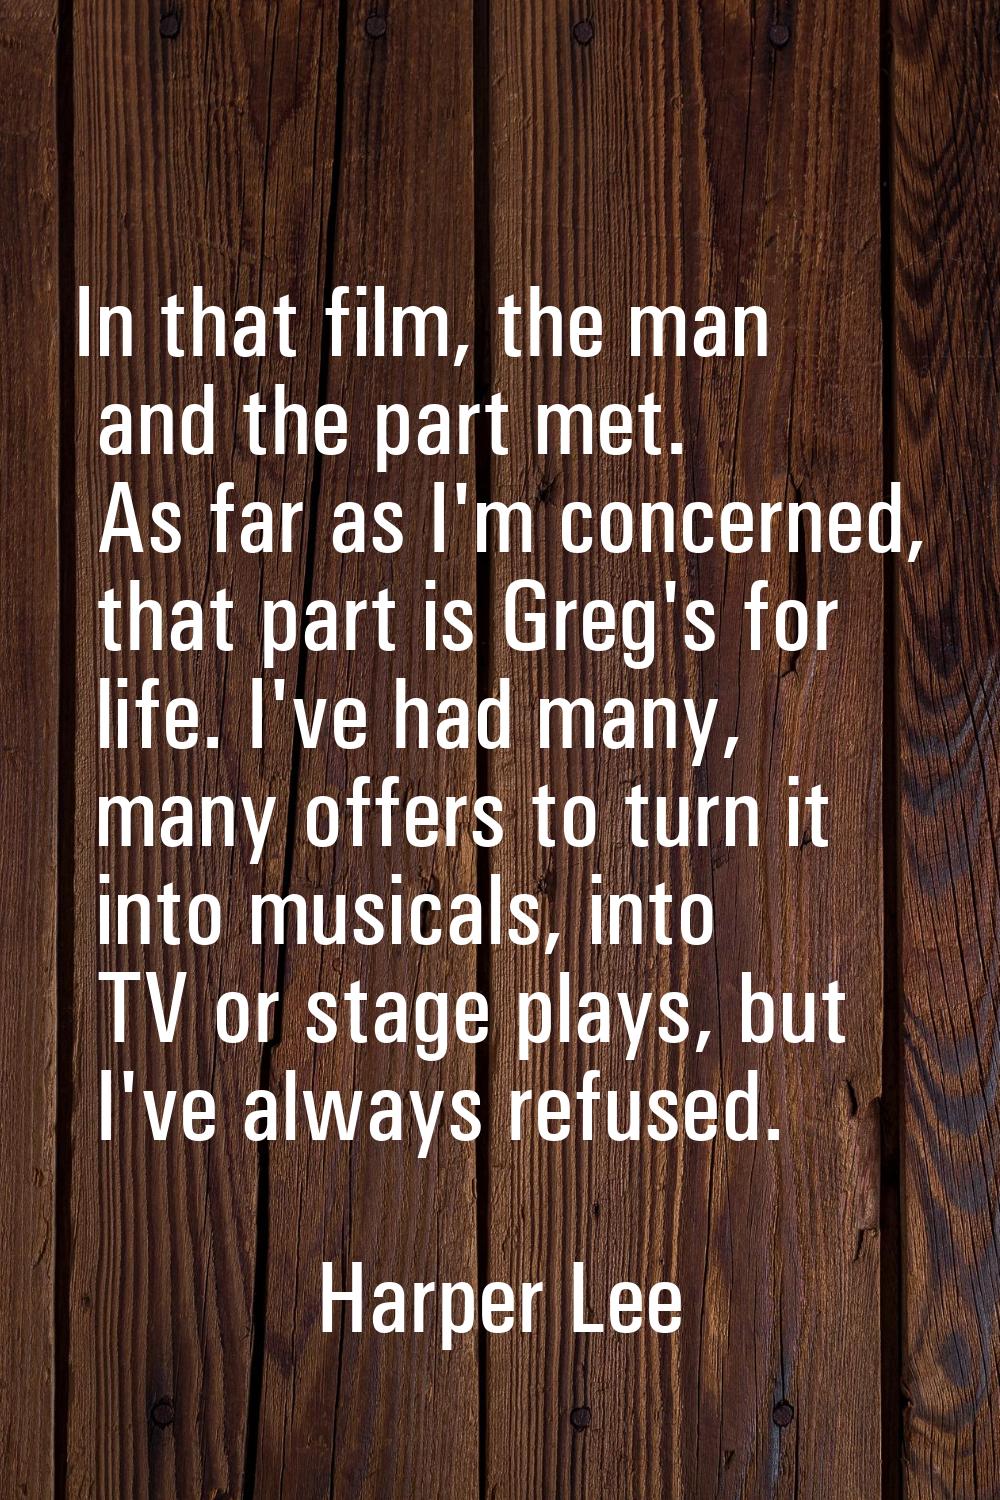 In that film, the man and the part met. As far as I'm concerned, that part is Greg's for life. I've